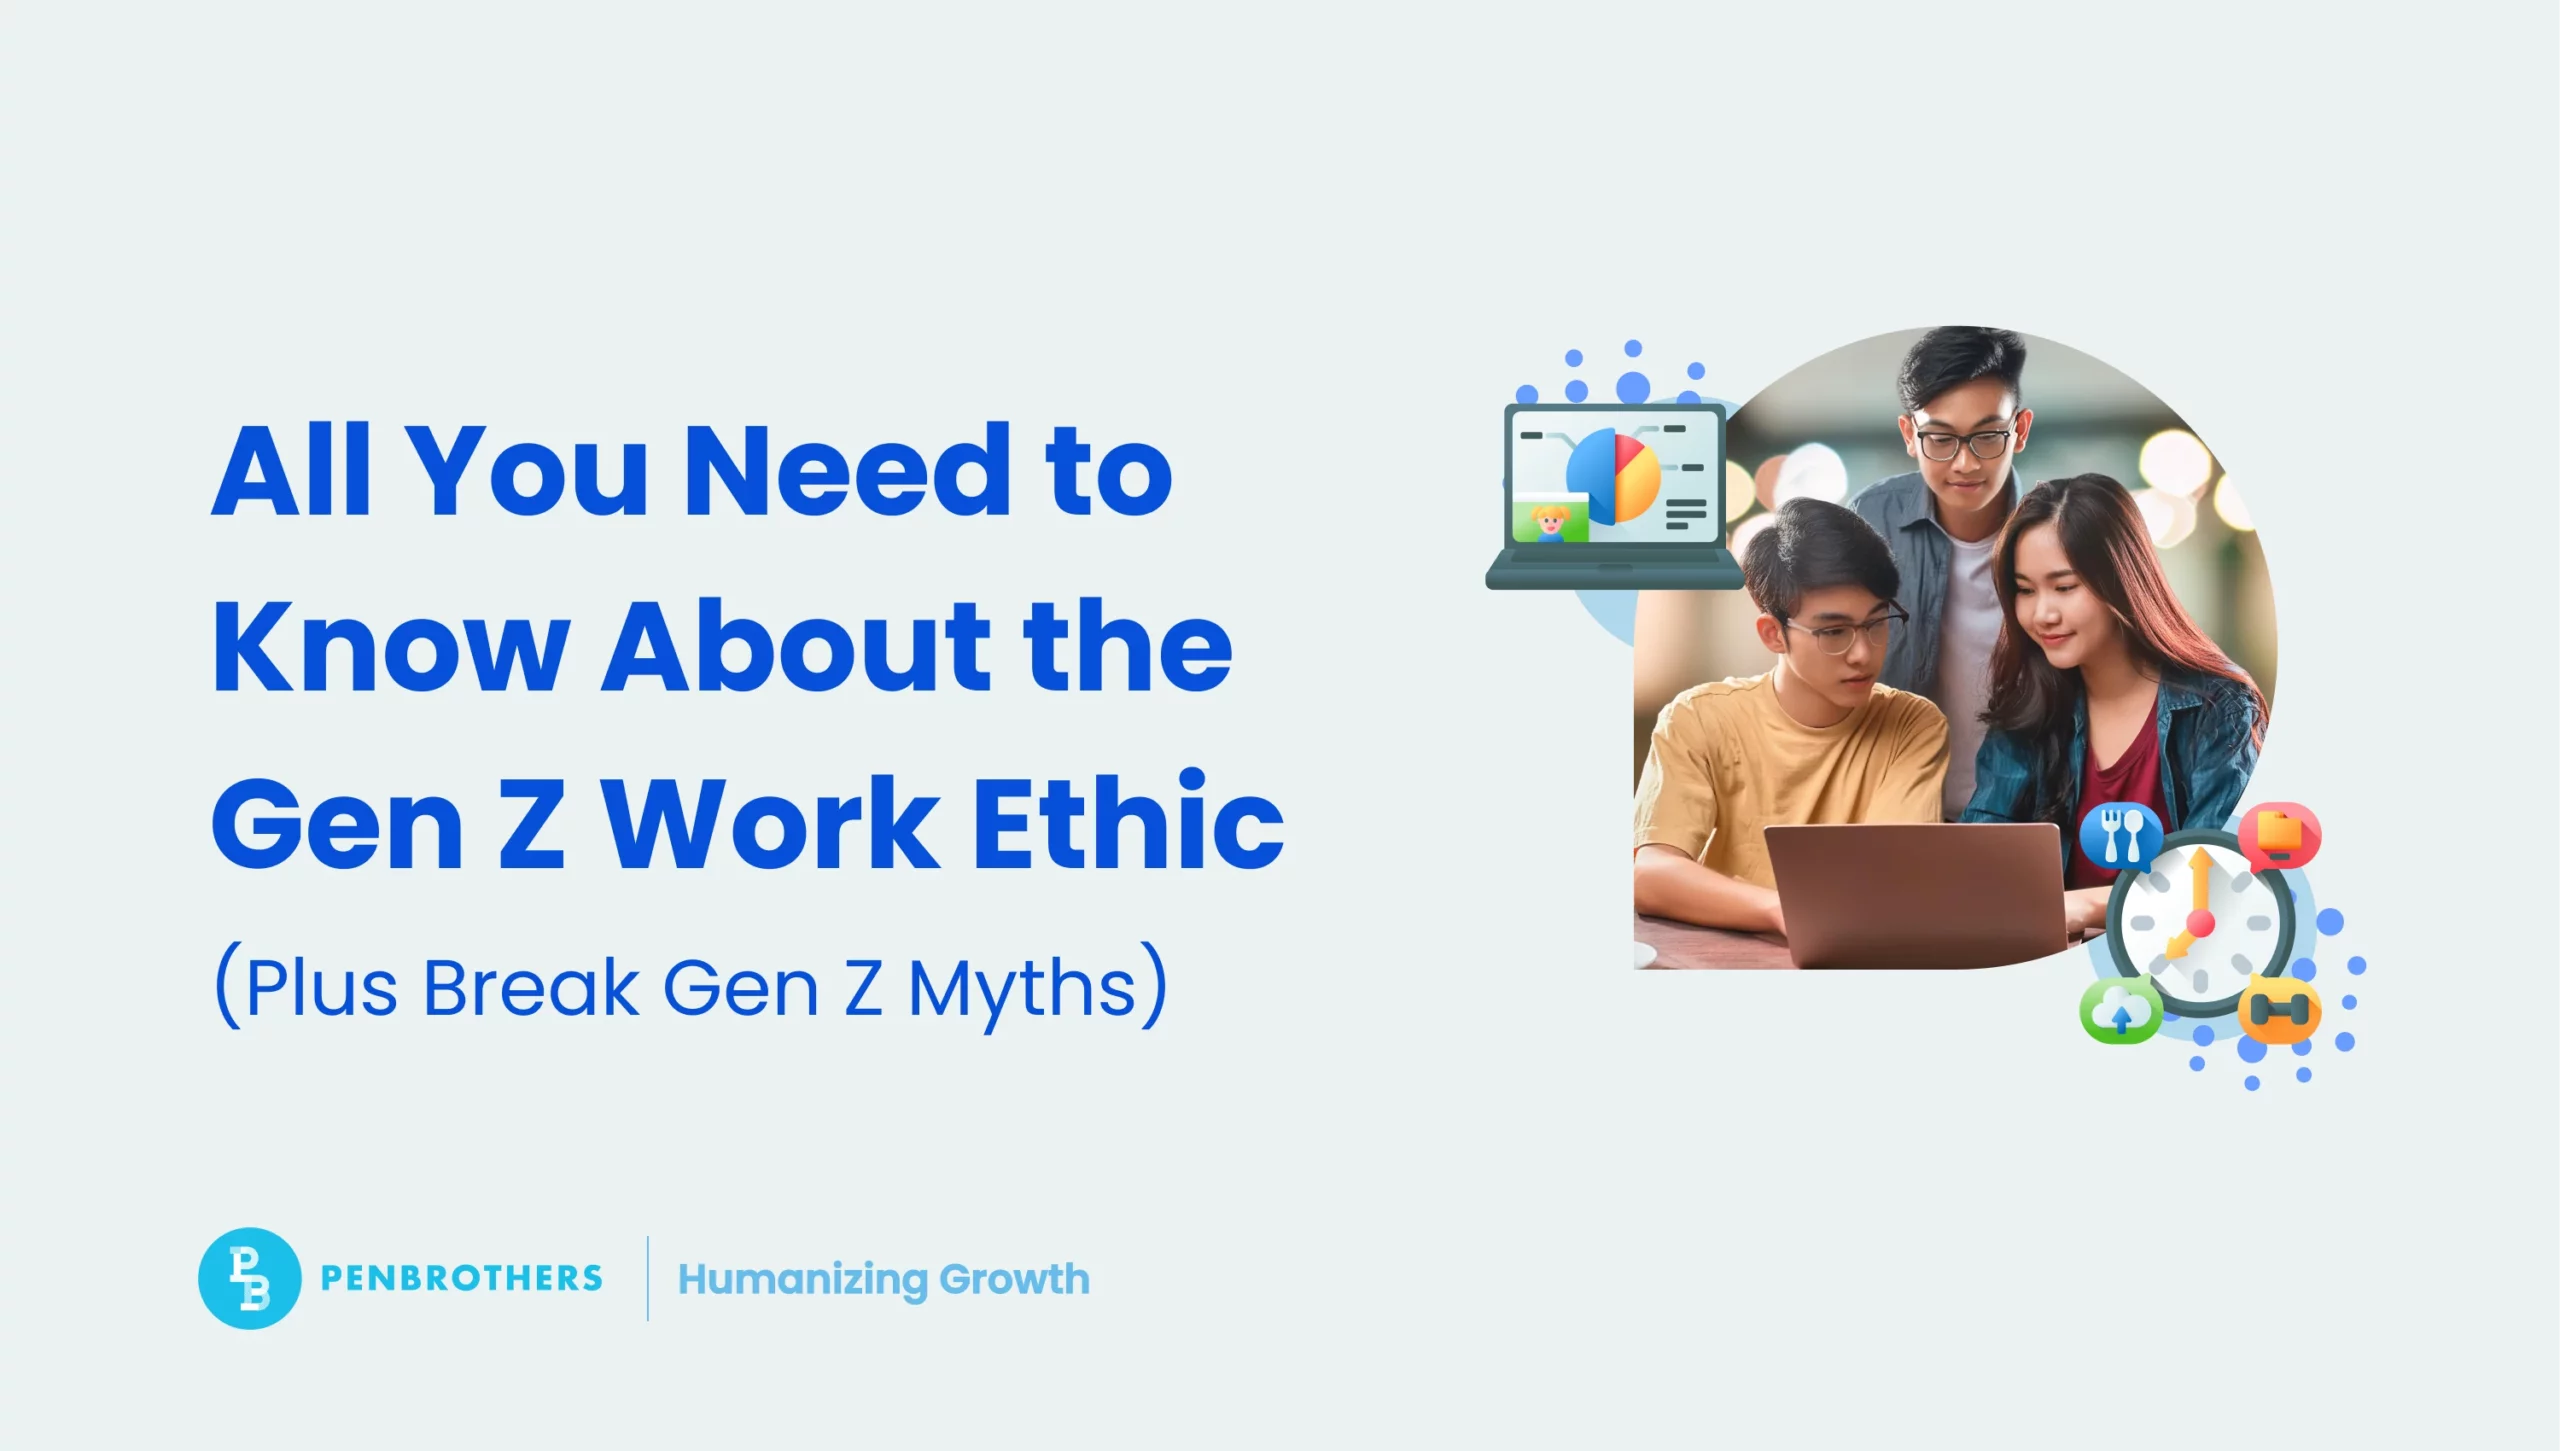 All You Need to Know About the Gen Z Work Ethic (Plus Break Gen Z Myths)